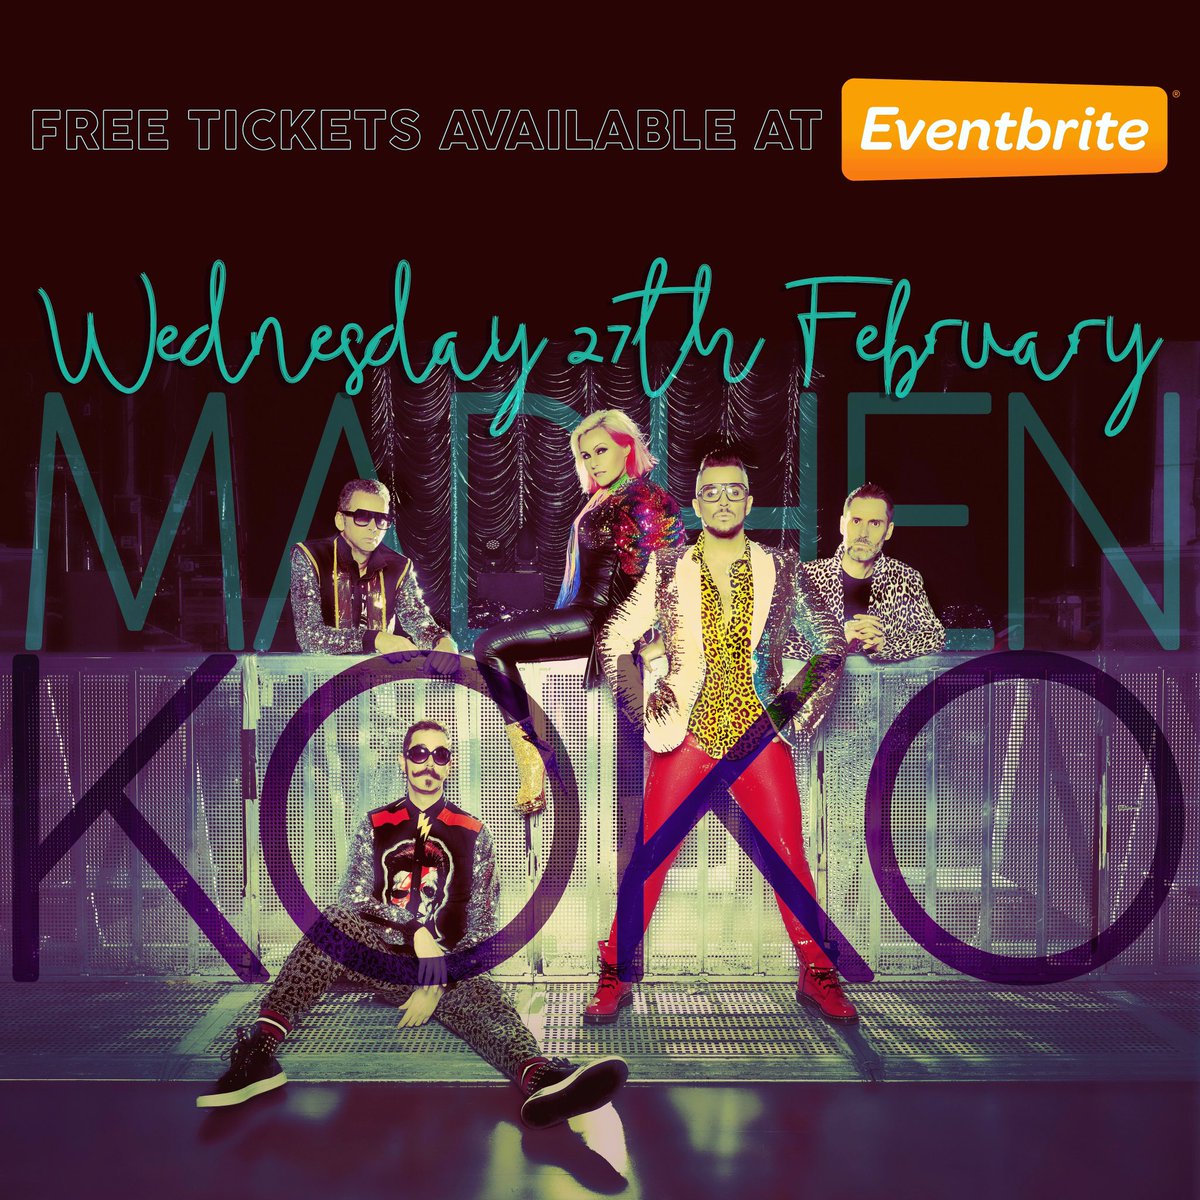 10 days to go! There are still tickets available for our free gig at @KOKOLondon @eventbriteuk on 27th Feb #madhen #eventbrite #gig #partyband #band #liveband #livegig #livemusic #live #freegig #freeevent #event #events #eventprofs #weddingband #weddingentertainment #weddingparty